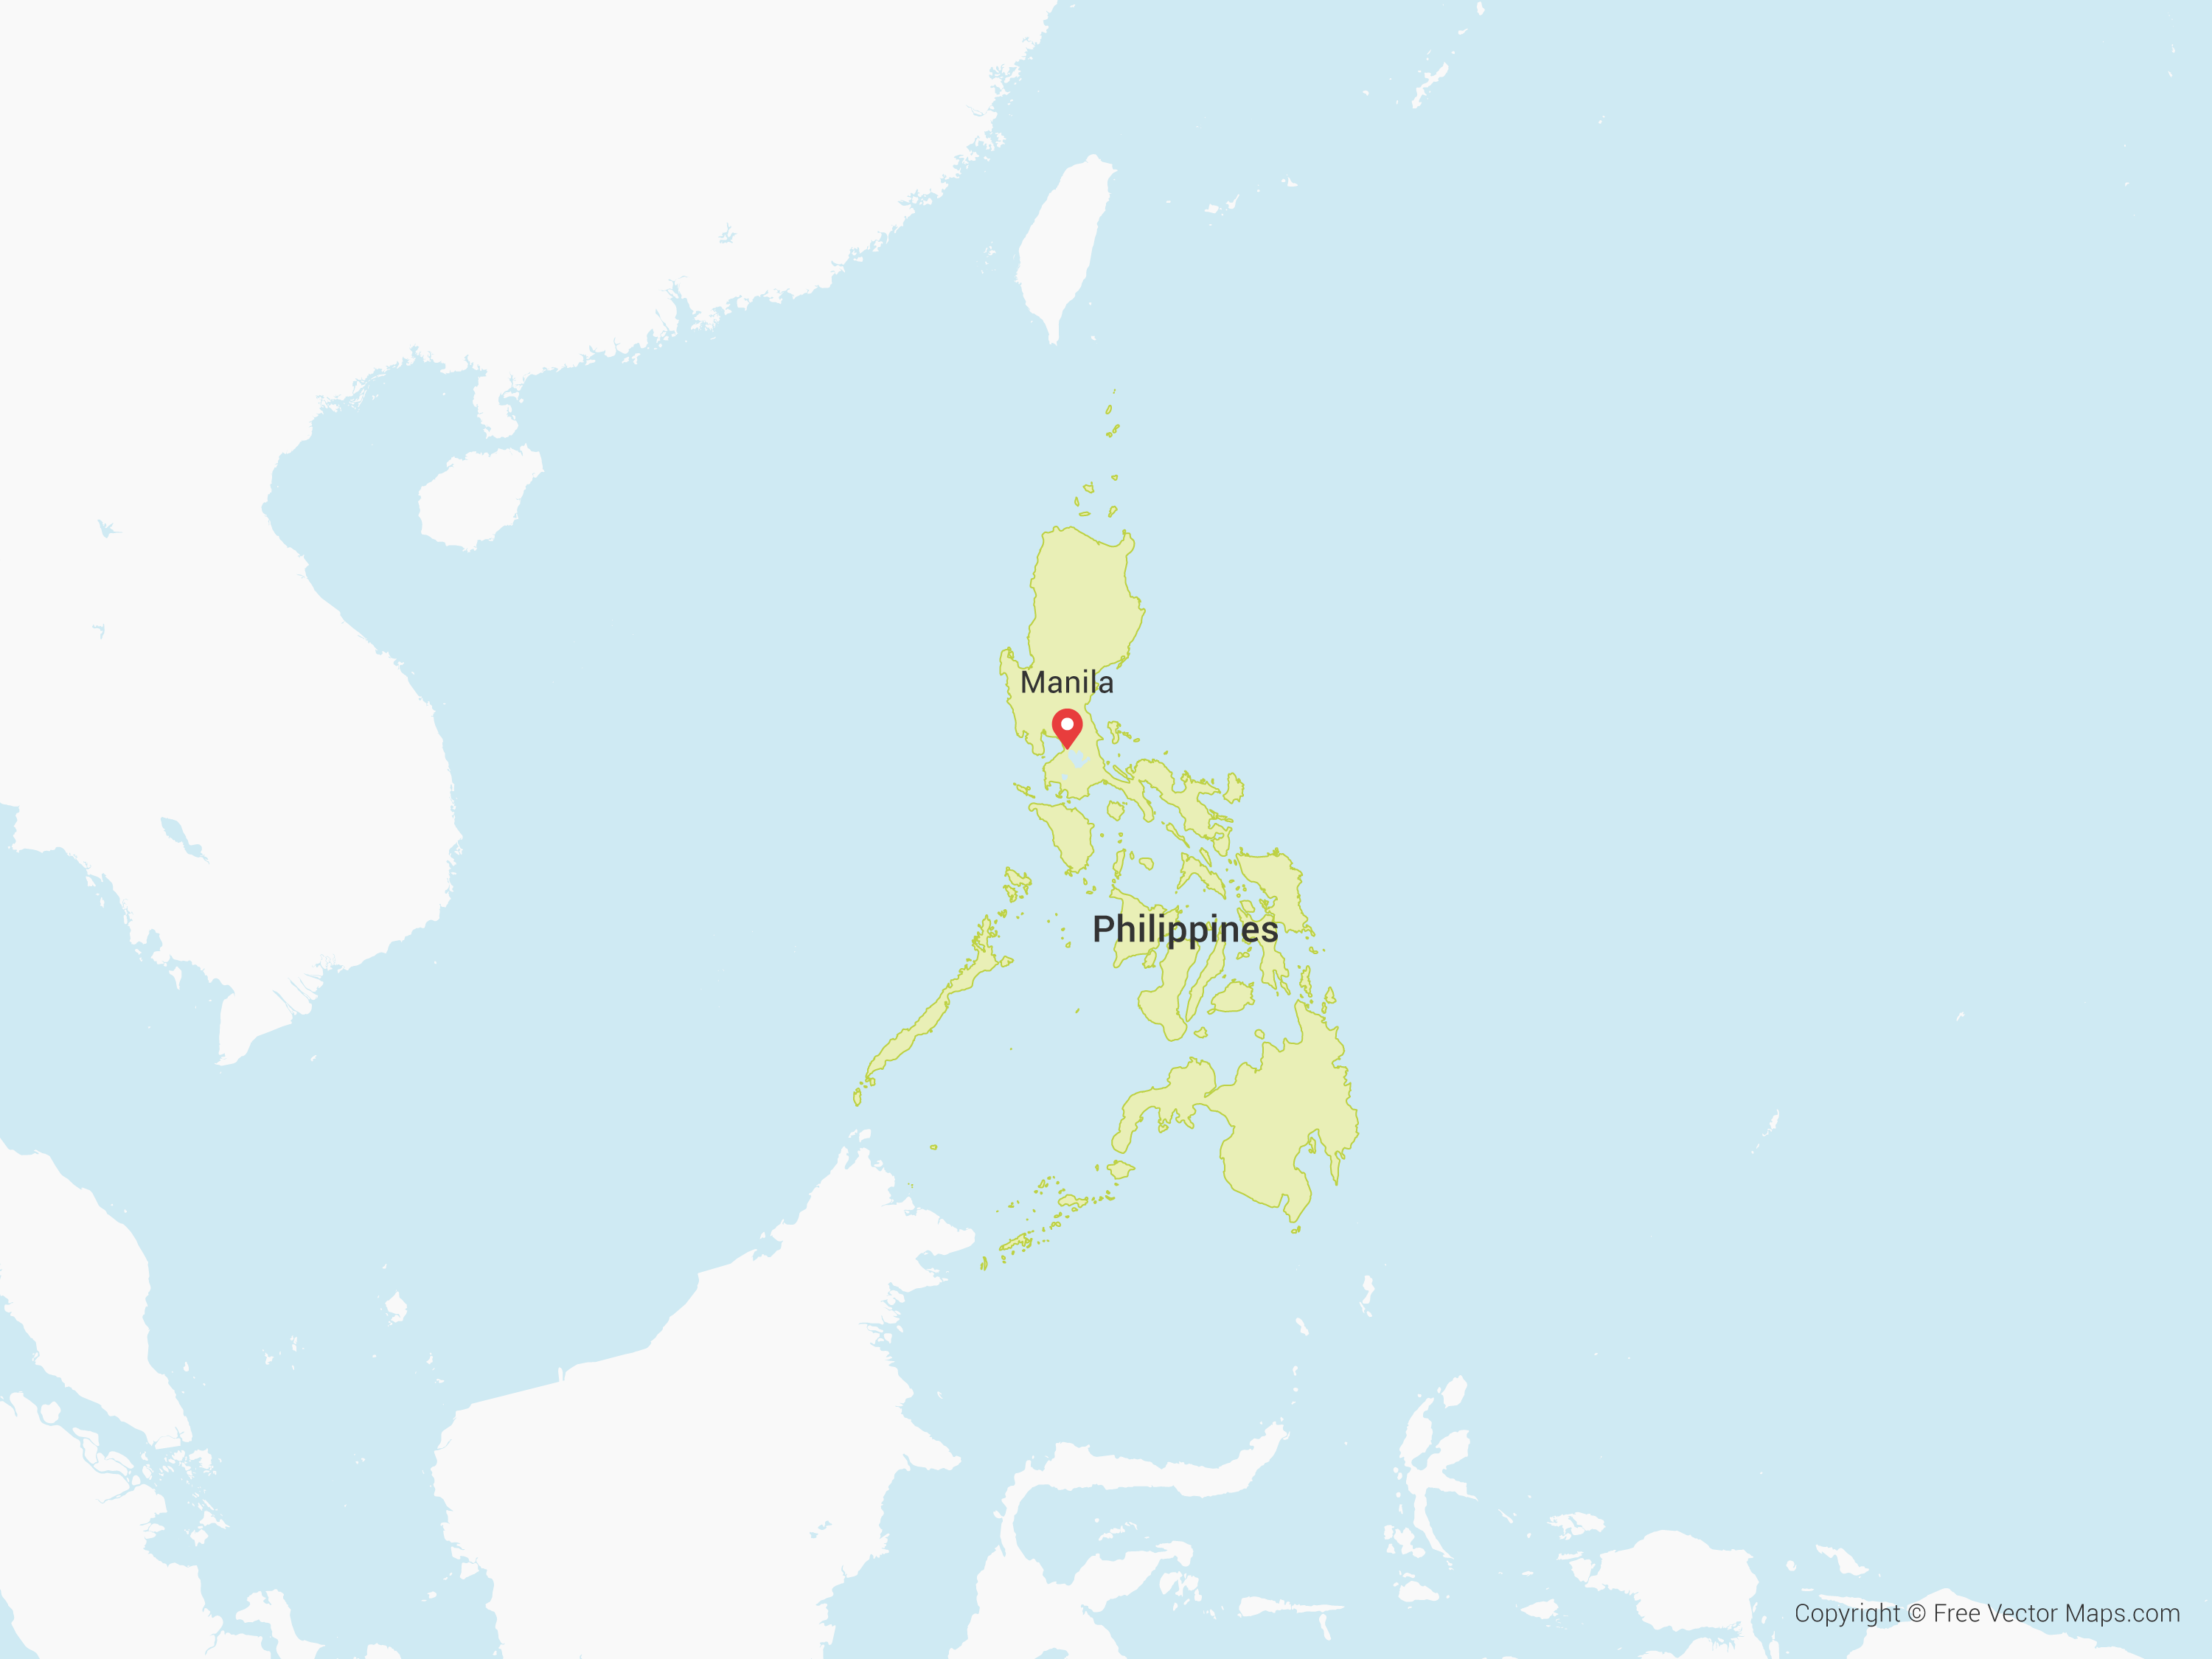 china to philippines travel time by ship